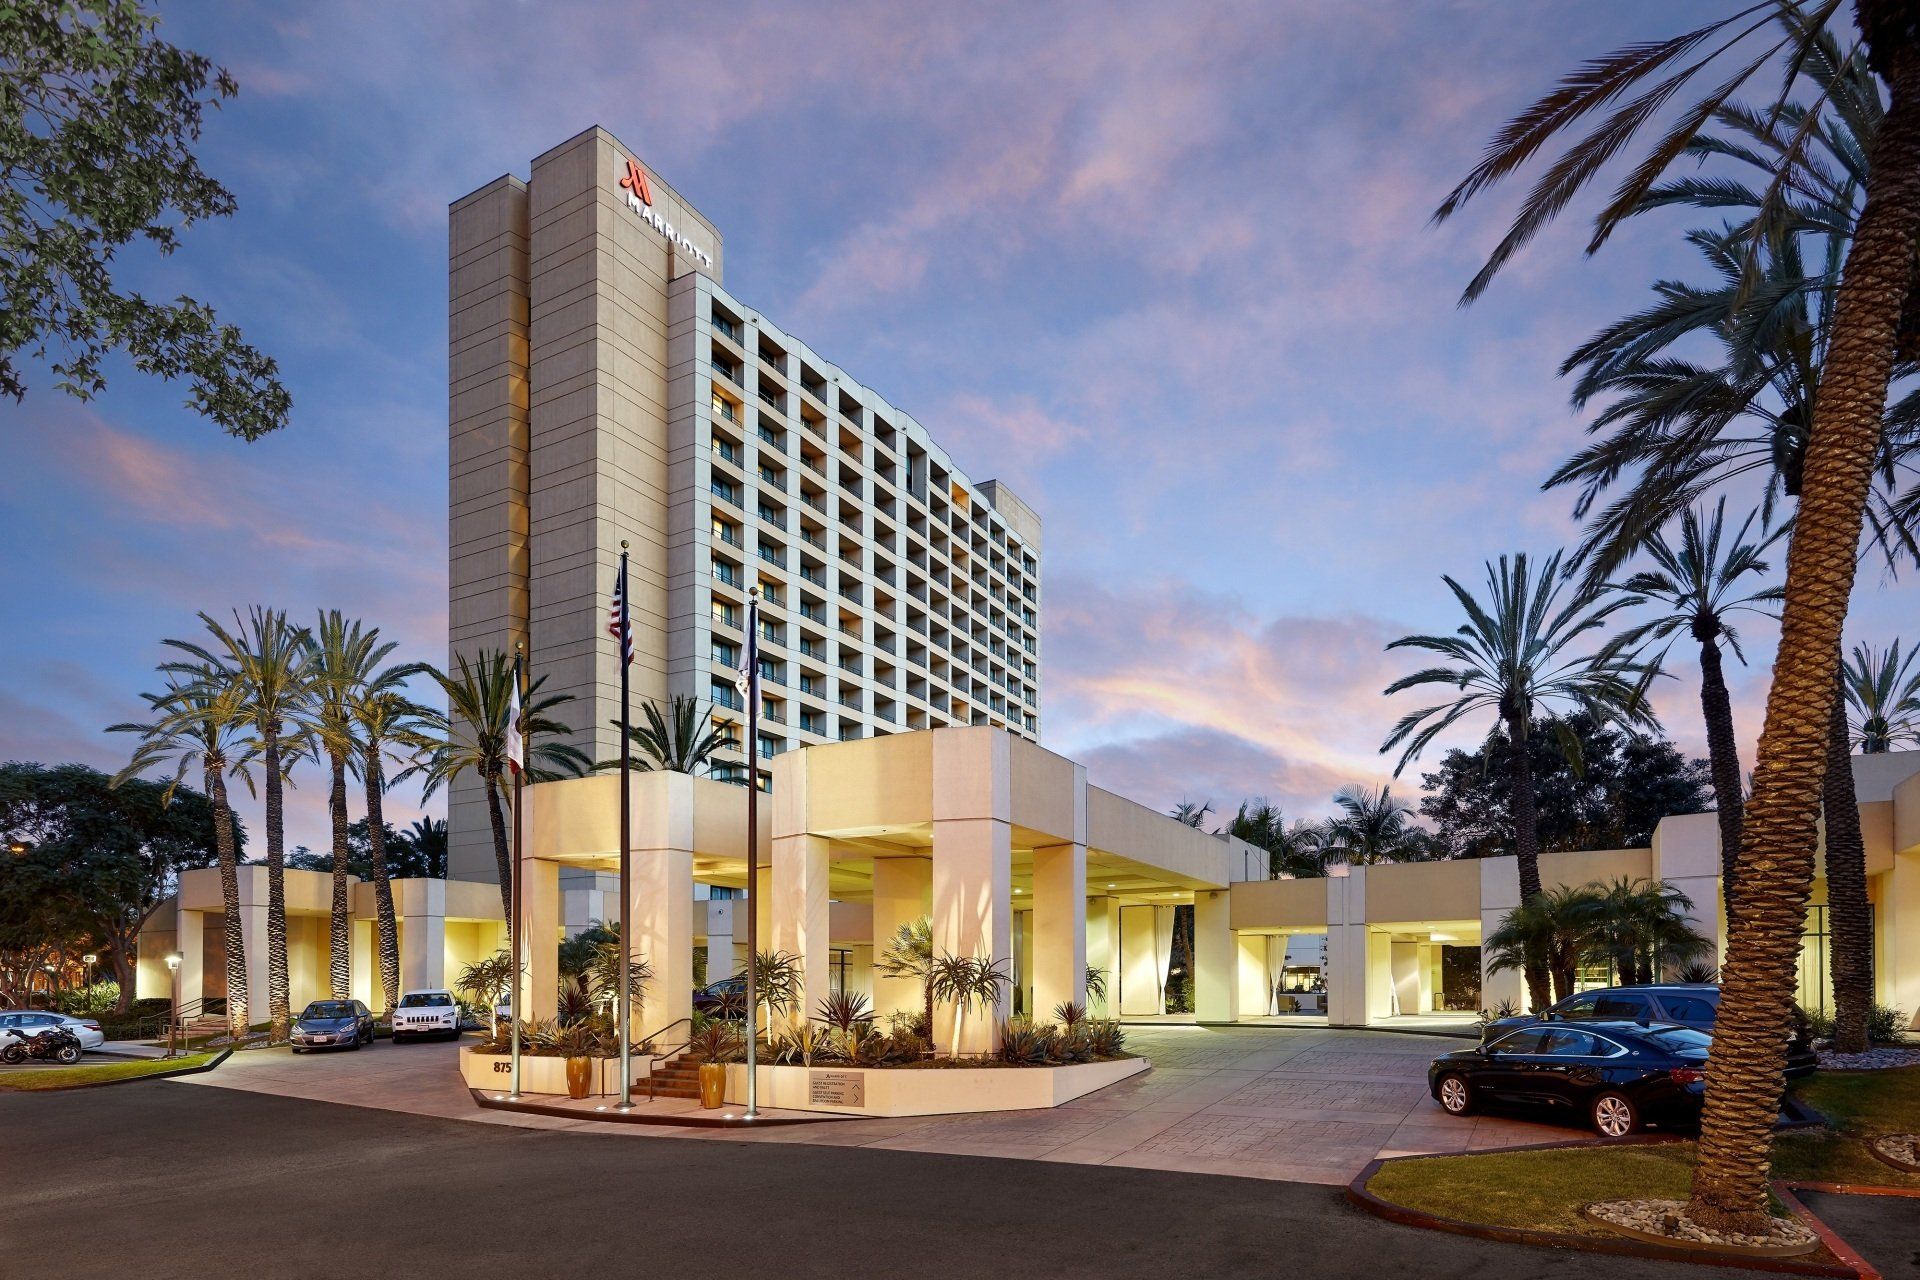 The San Diego Marriott Mission Valley Hotel front entrance in San Diego, Ca.